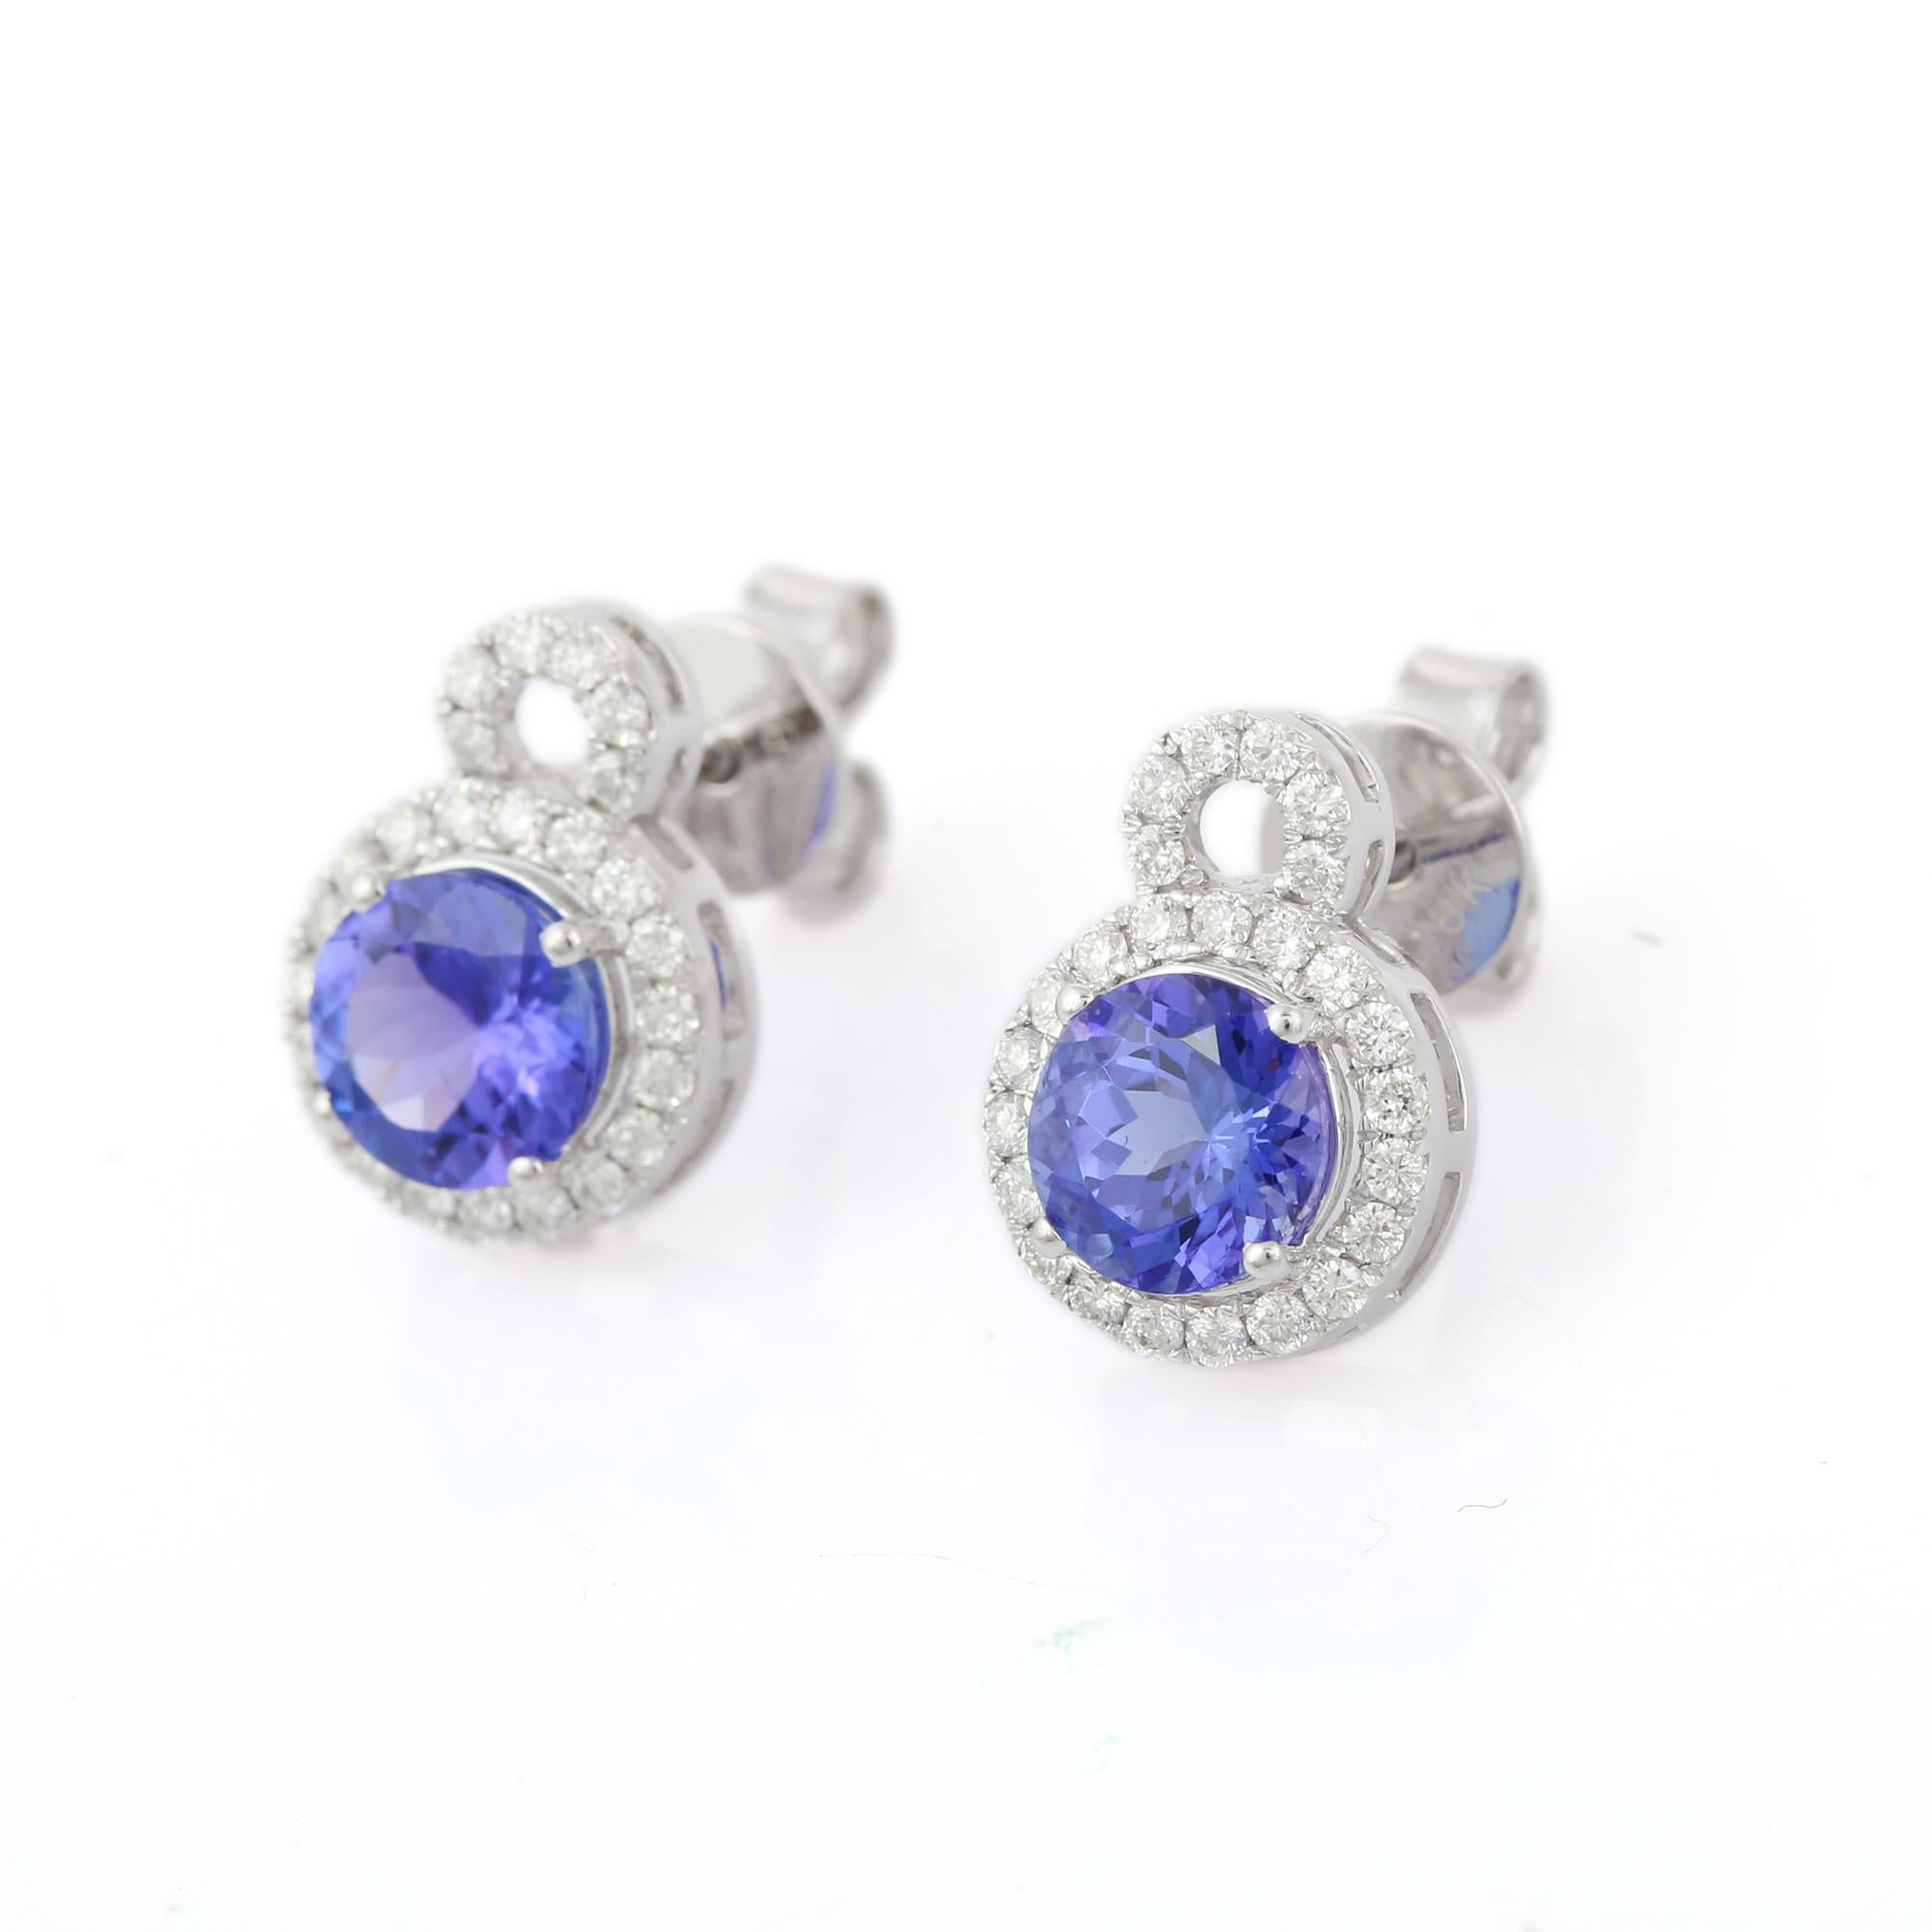 Studs create a subtle beauty while showcasing the colors of the natural precious gemstones and illuminating diamonds making a statement.

Round cut tanzanite studs with diamonds in 18K white gold. Embrace your look with these stunning pair of